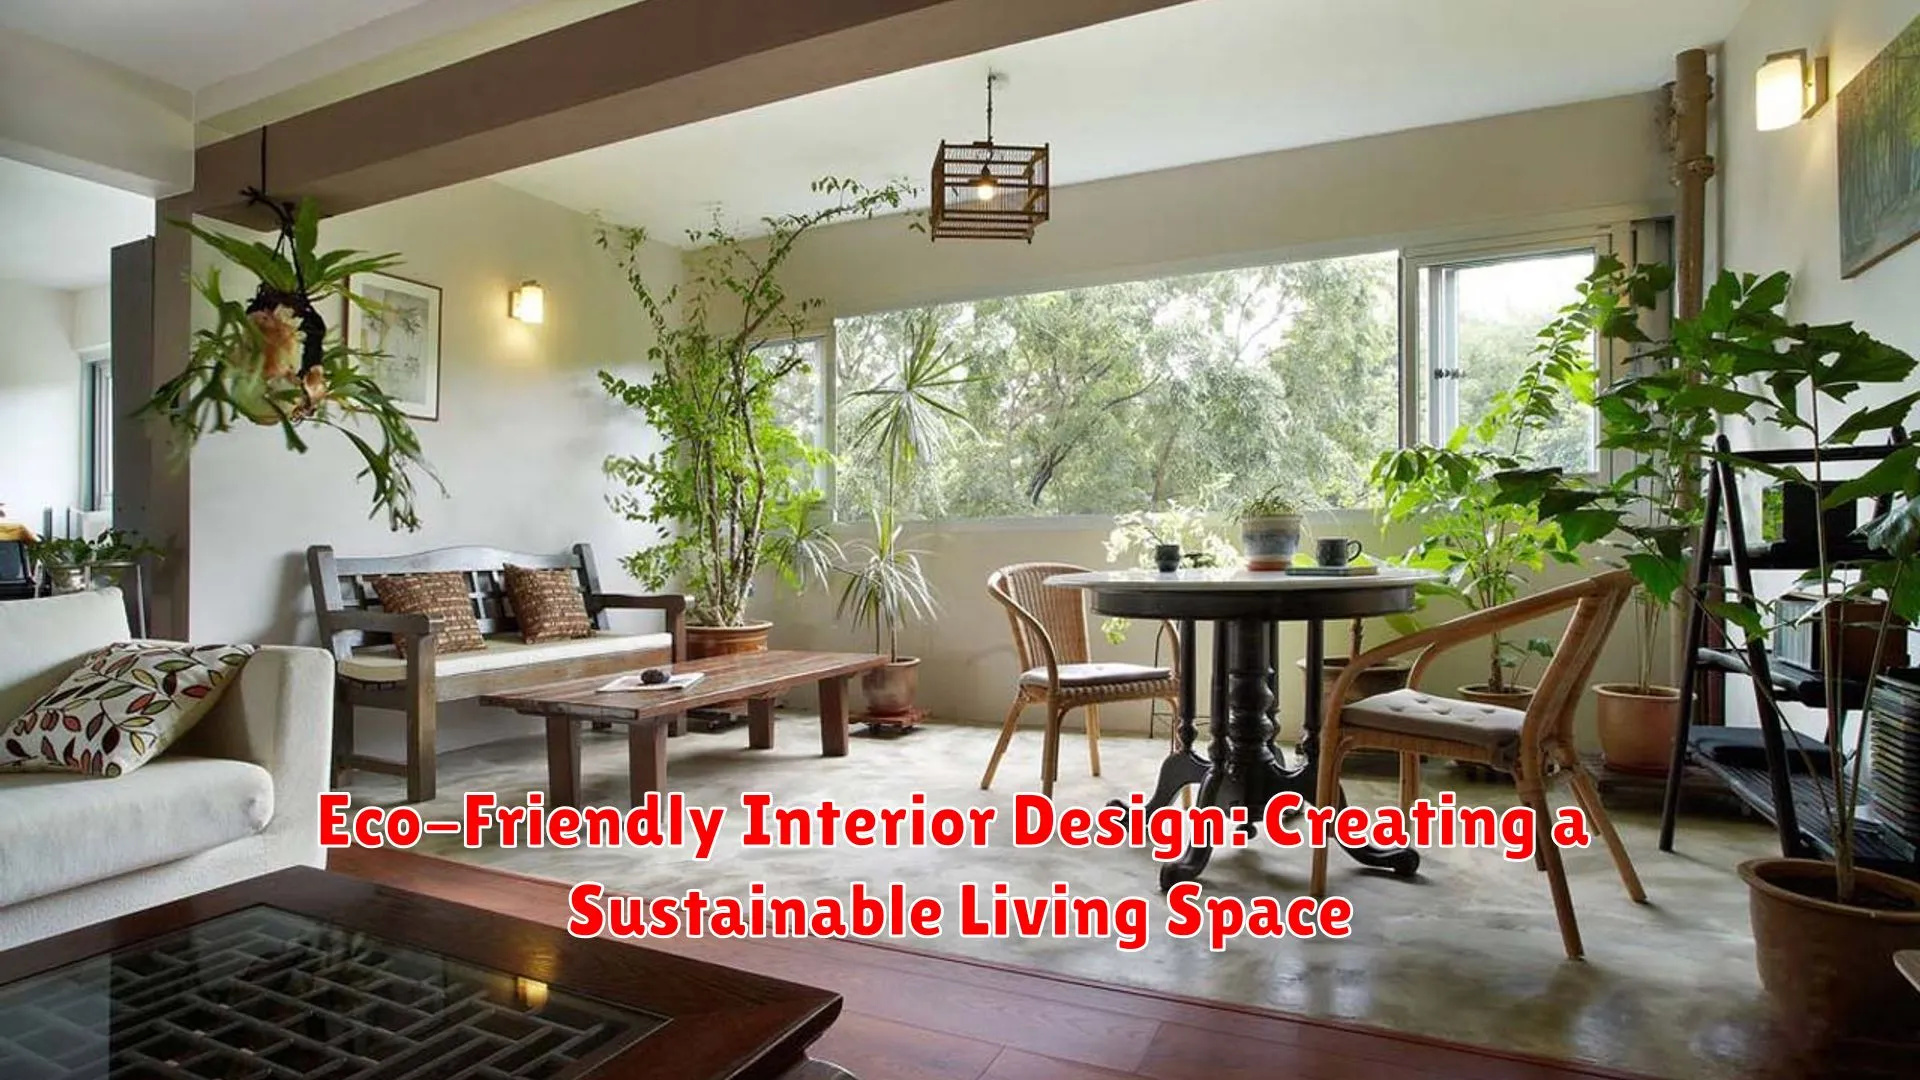 Eco-Friendly Interior Design: Creating a Sustainable Living Space